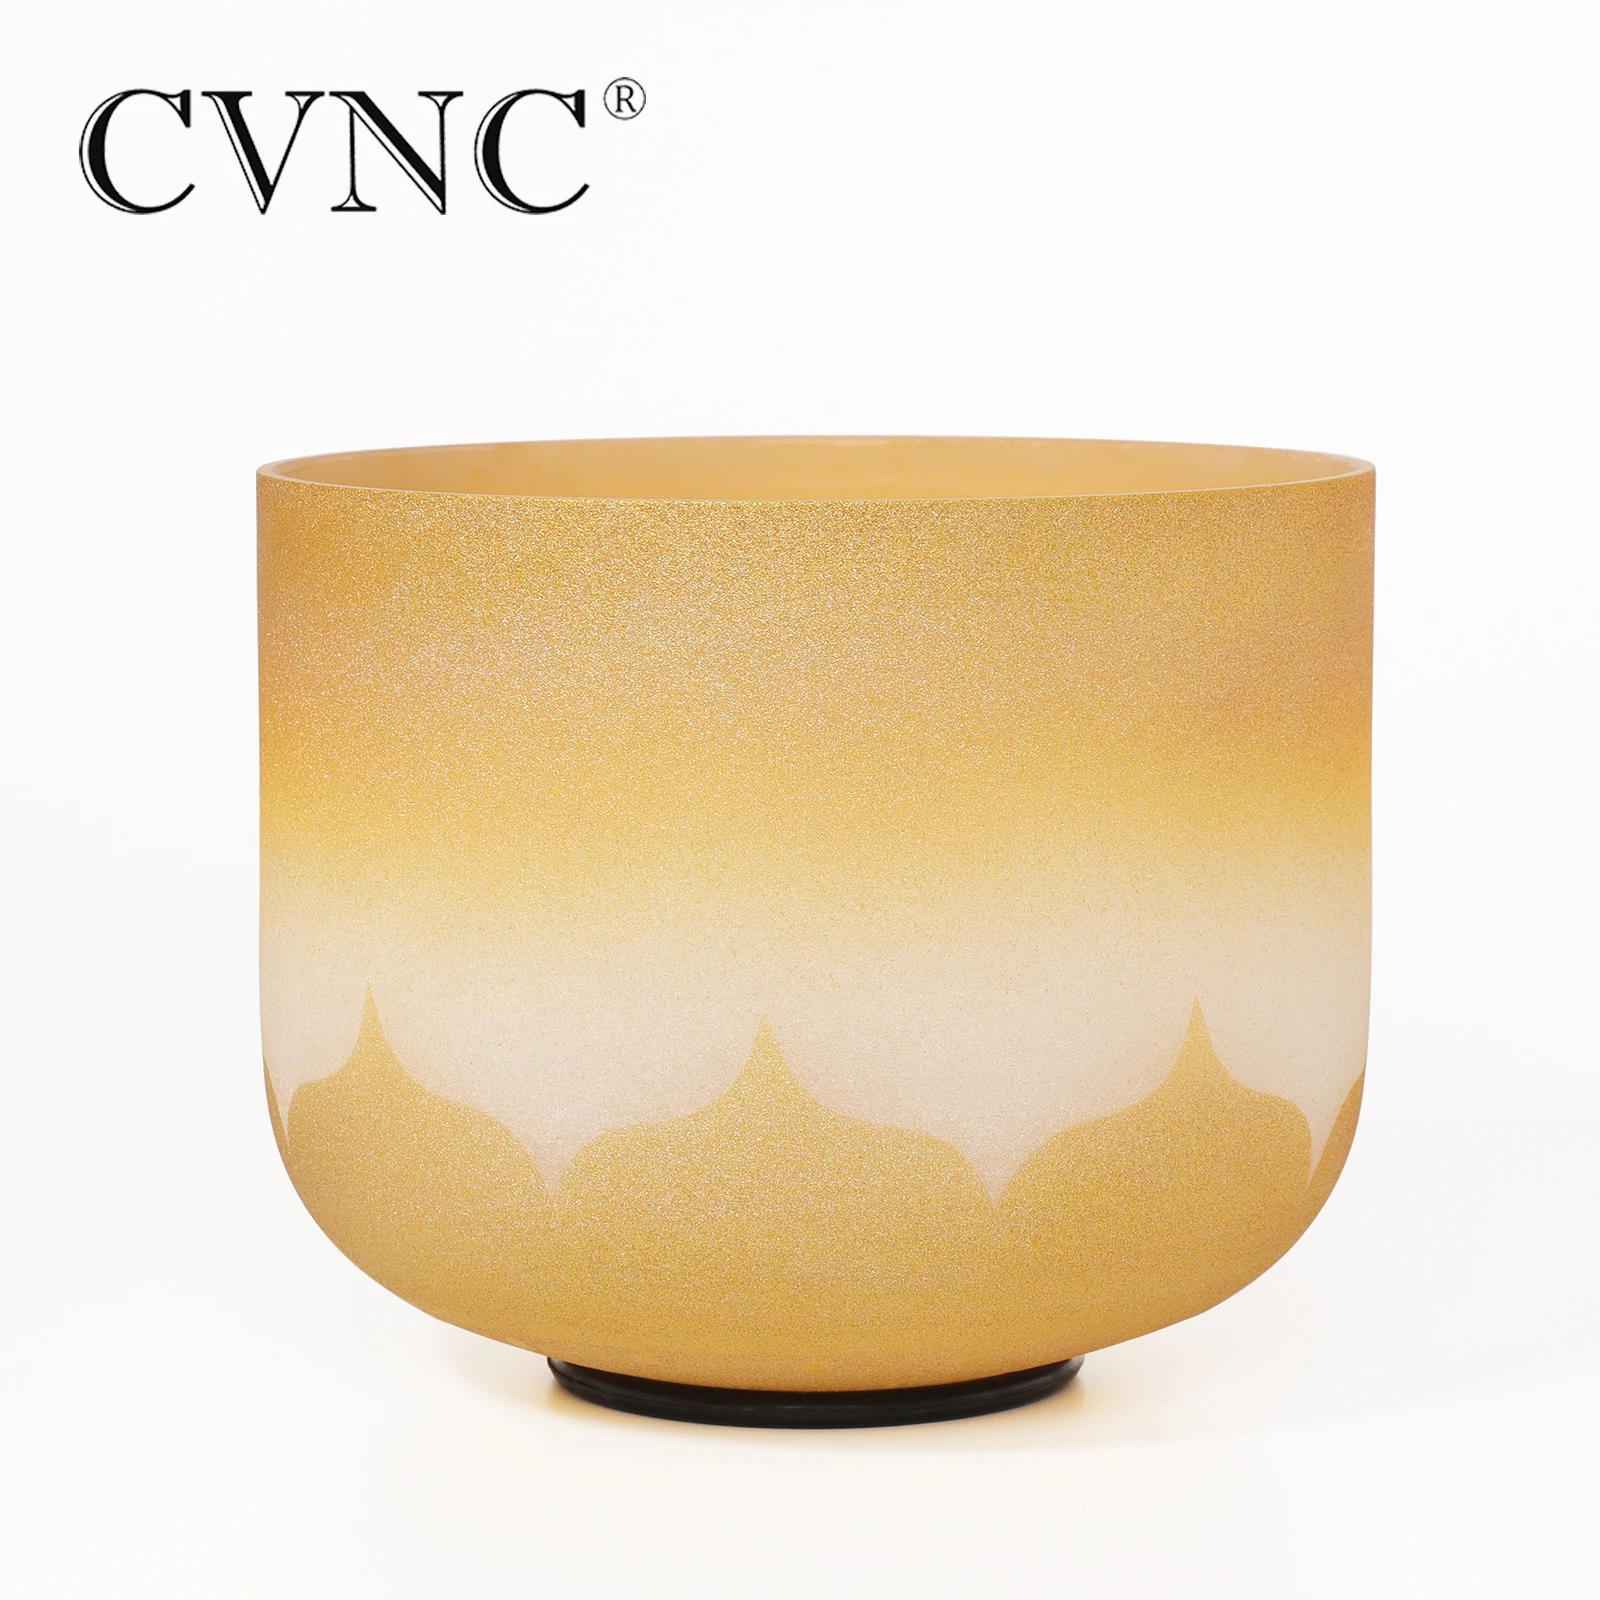 Enlarge CVNC 12 Inch Gold Lotus Chakra Quartz Crystal Singing Bowl C/D/E/F/G/A/B Note with Free Ruuber Mallet and O-ring for Meditation